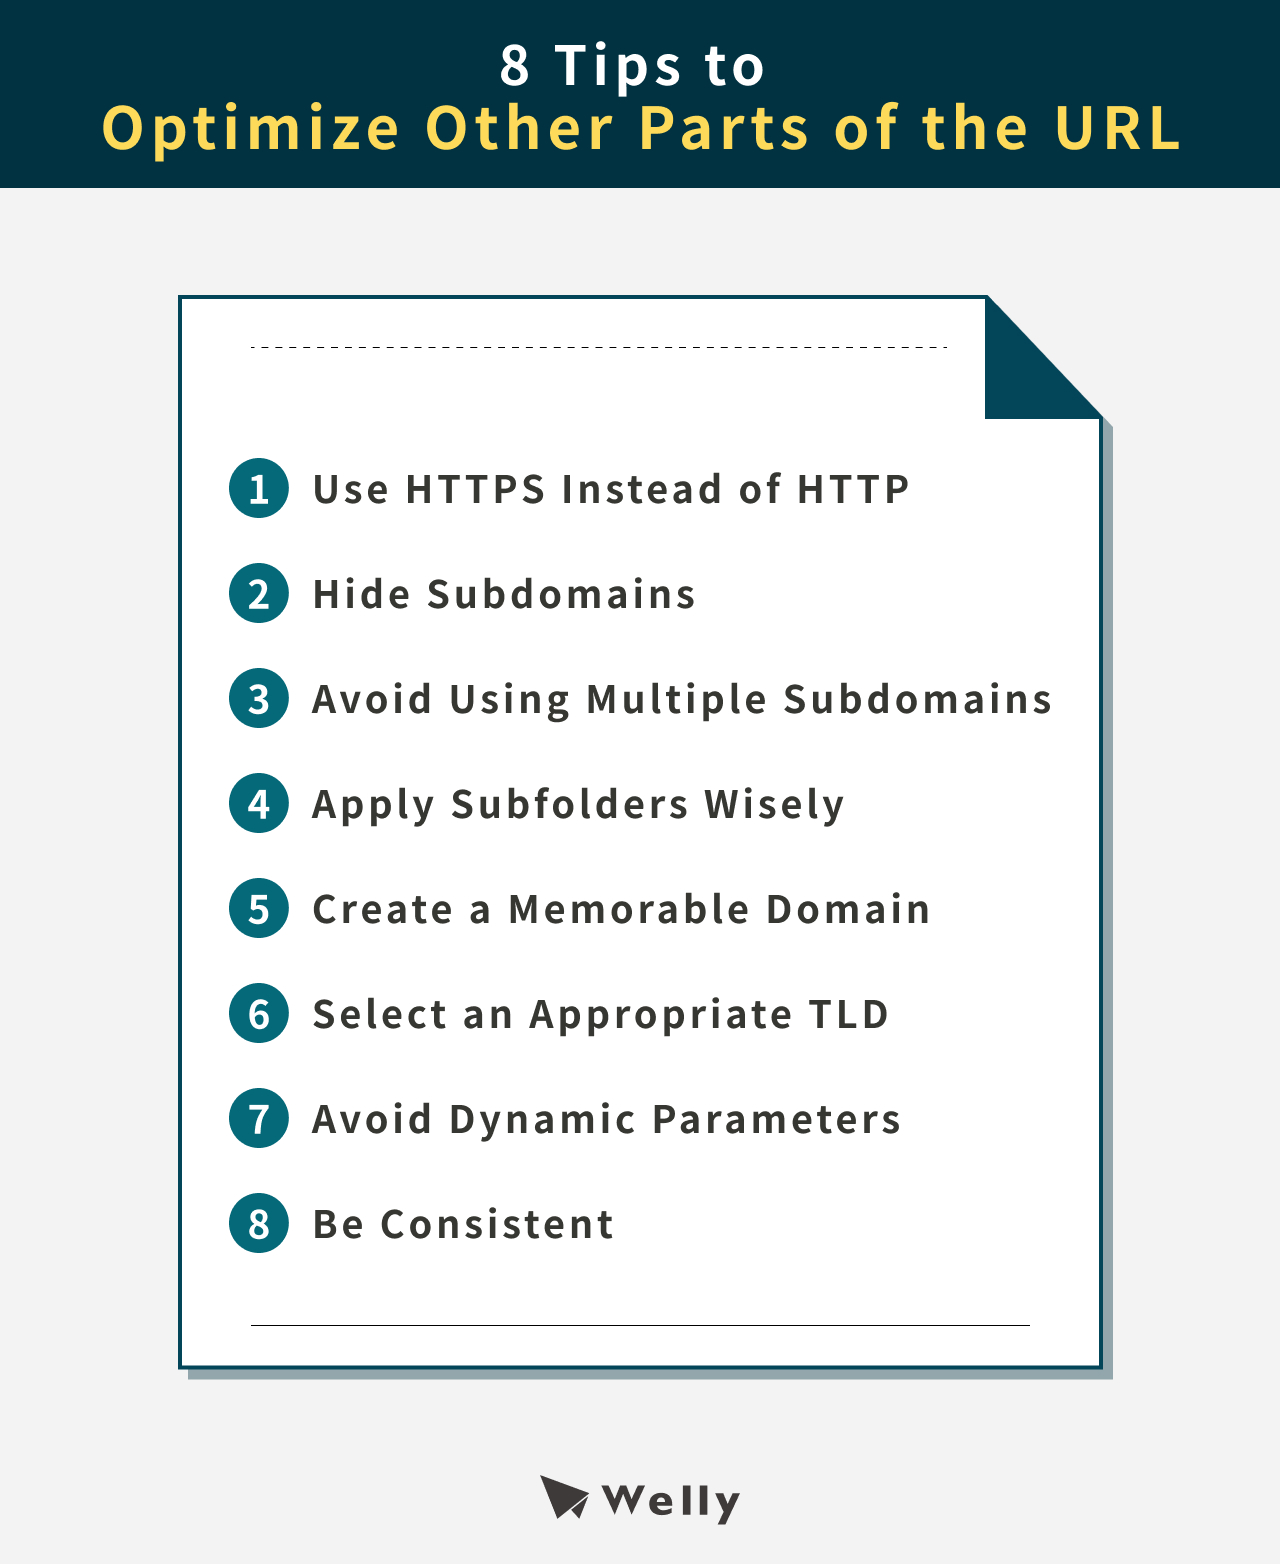 Tips to Optimize Other Parts of the URL